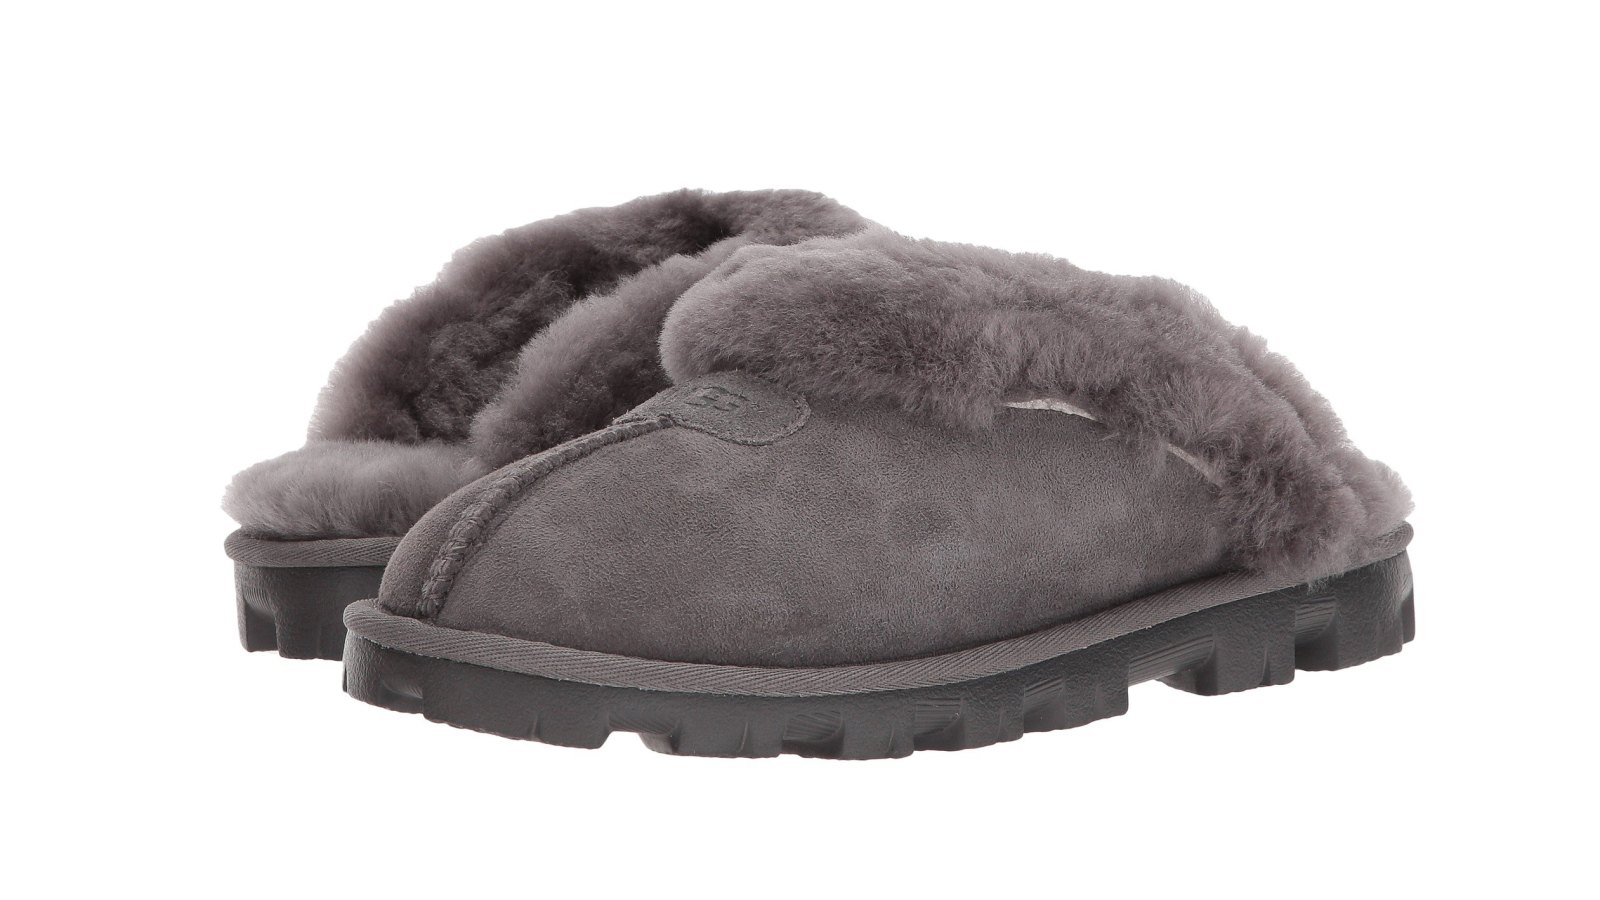 Best-Selling Slippers Are on Rare Sale — Get 33% Off!